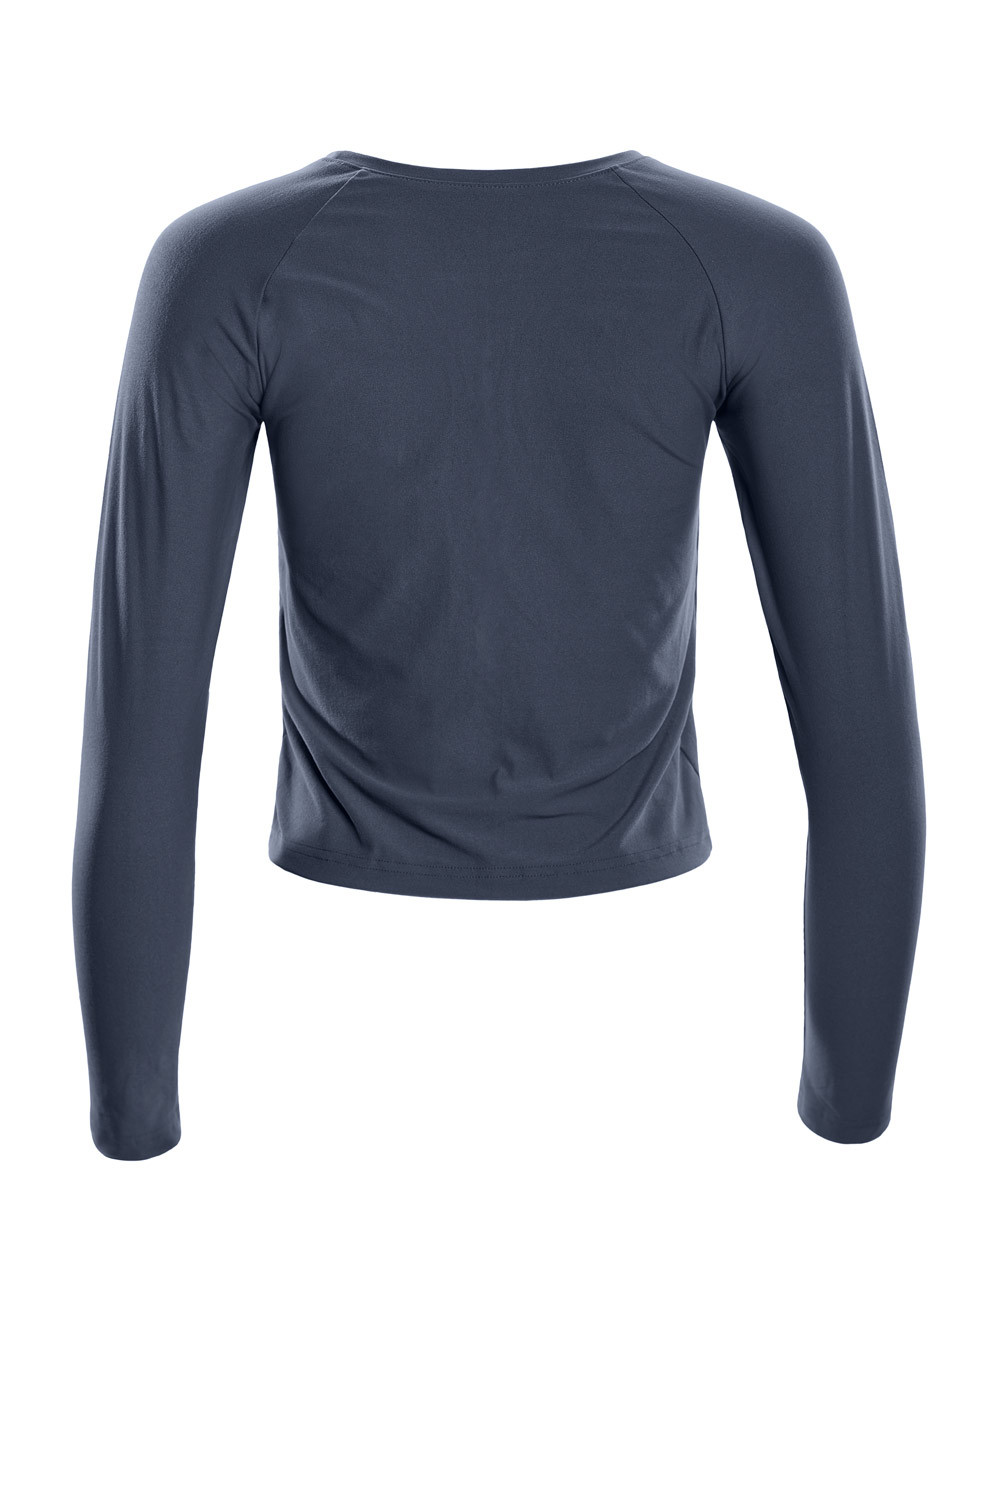 Sleeve Ultra AET119LS, Top Soft Soft and Style Winshape anthrazit, Functional Long Cropped Light